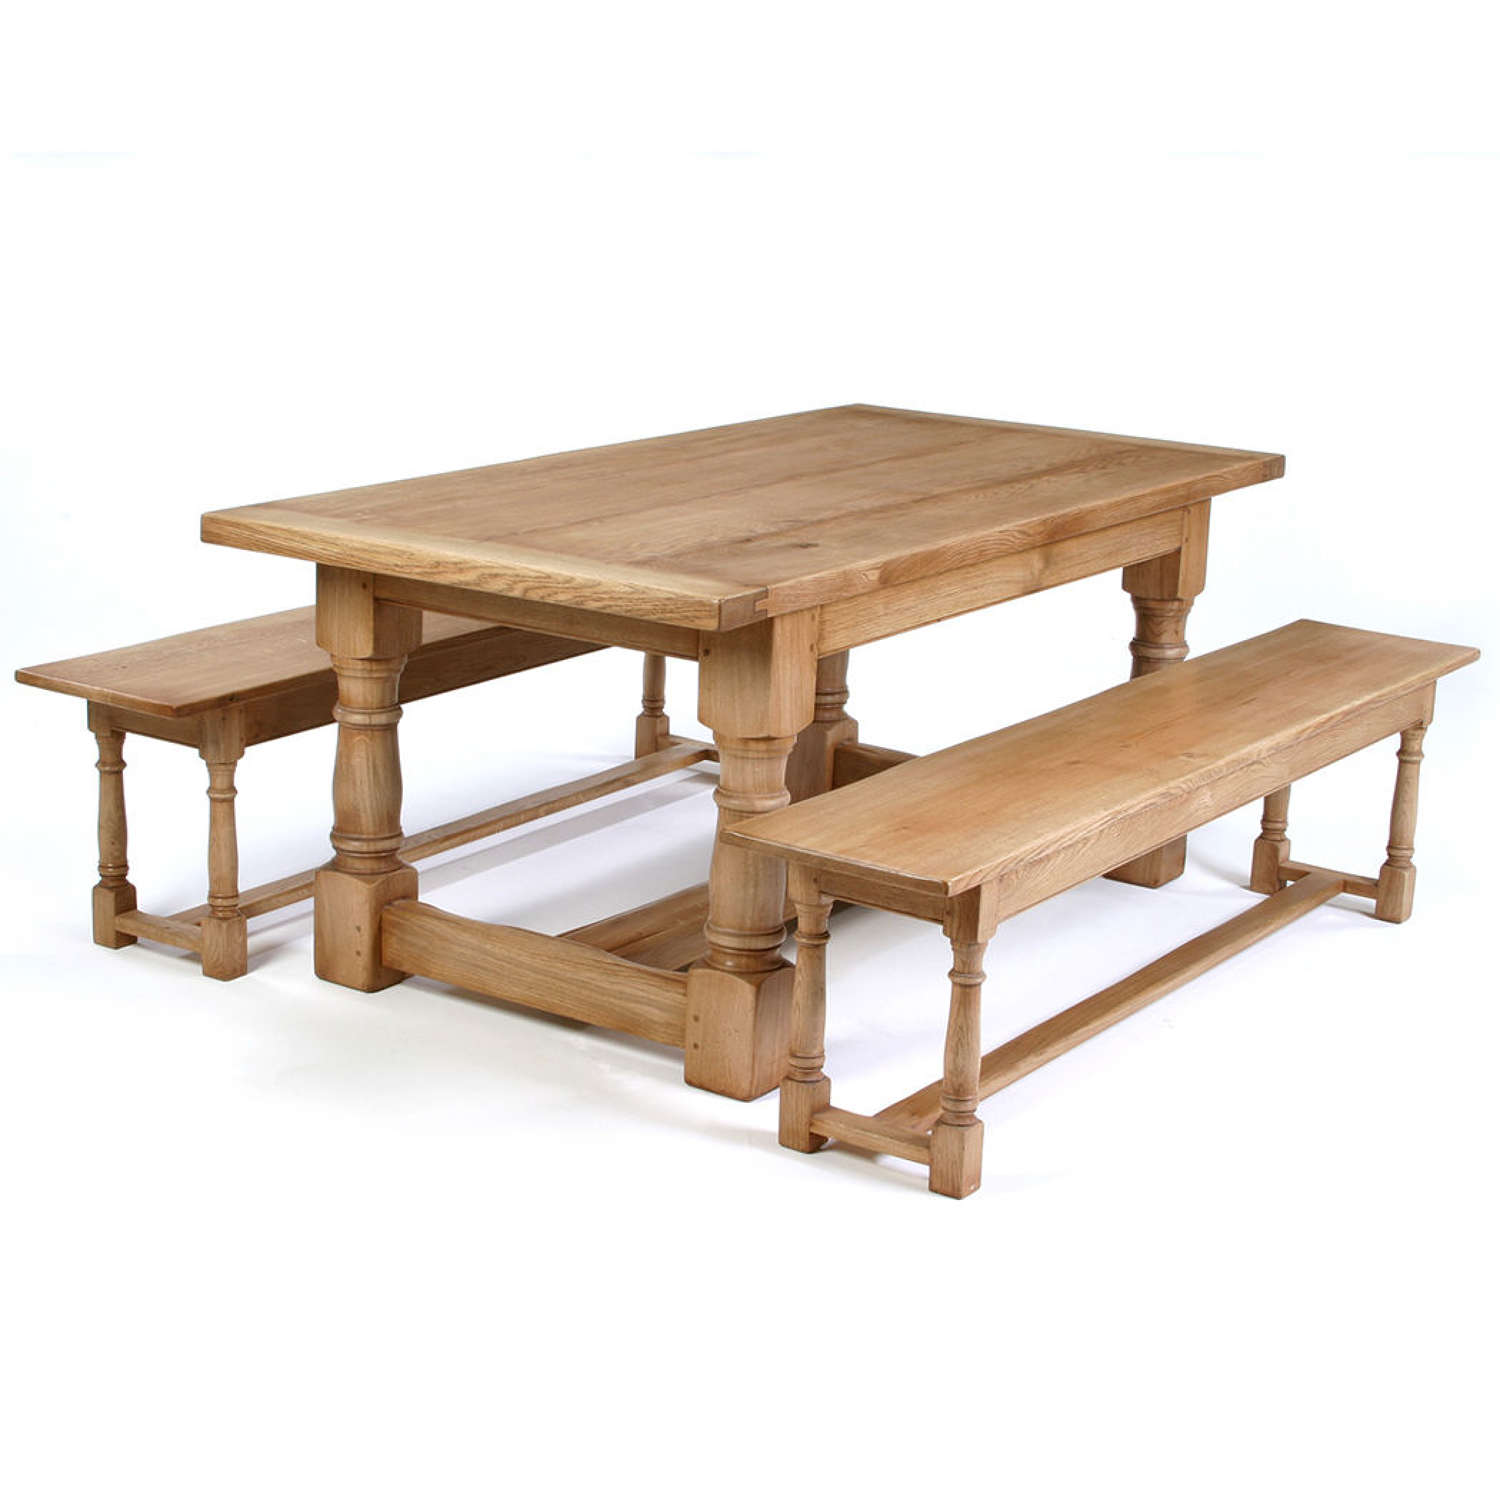 Oak Cannon Leg Refectory Dining Tables